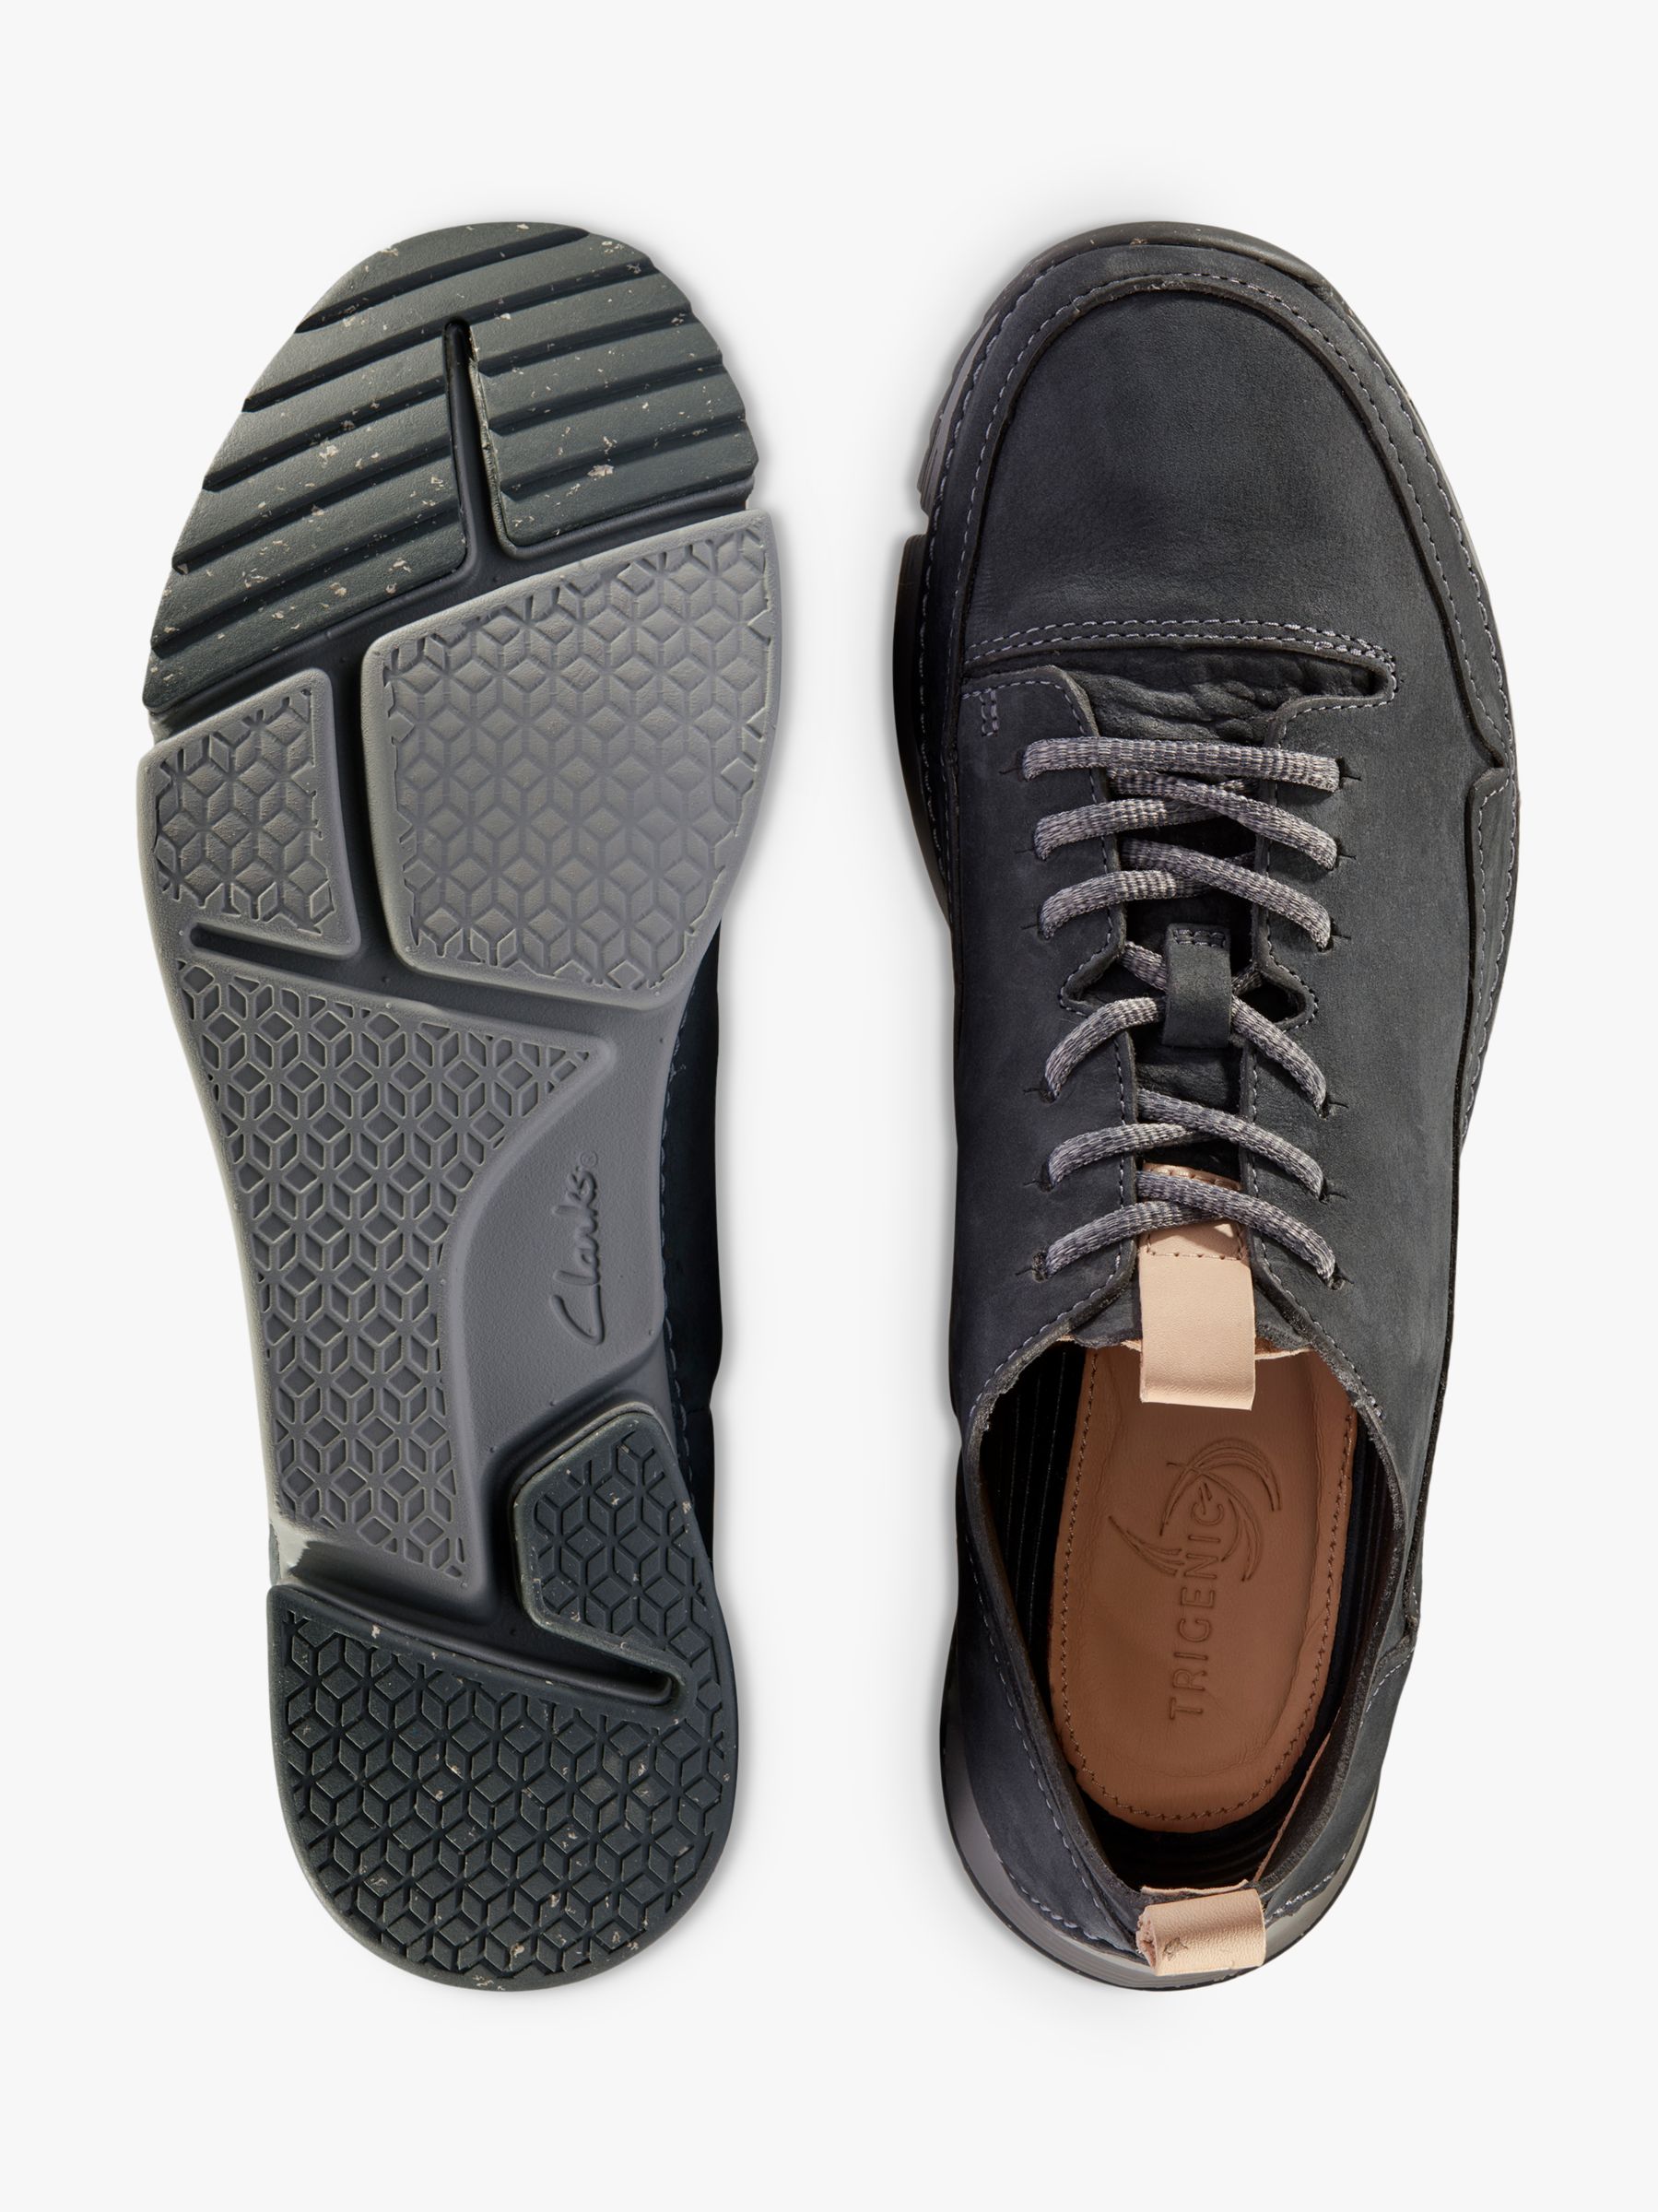 Clarks Tri Spark Leather Trainers, Dark Grey at John Lewis & Partners